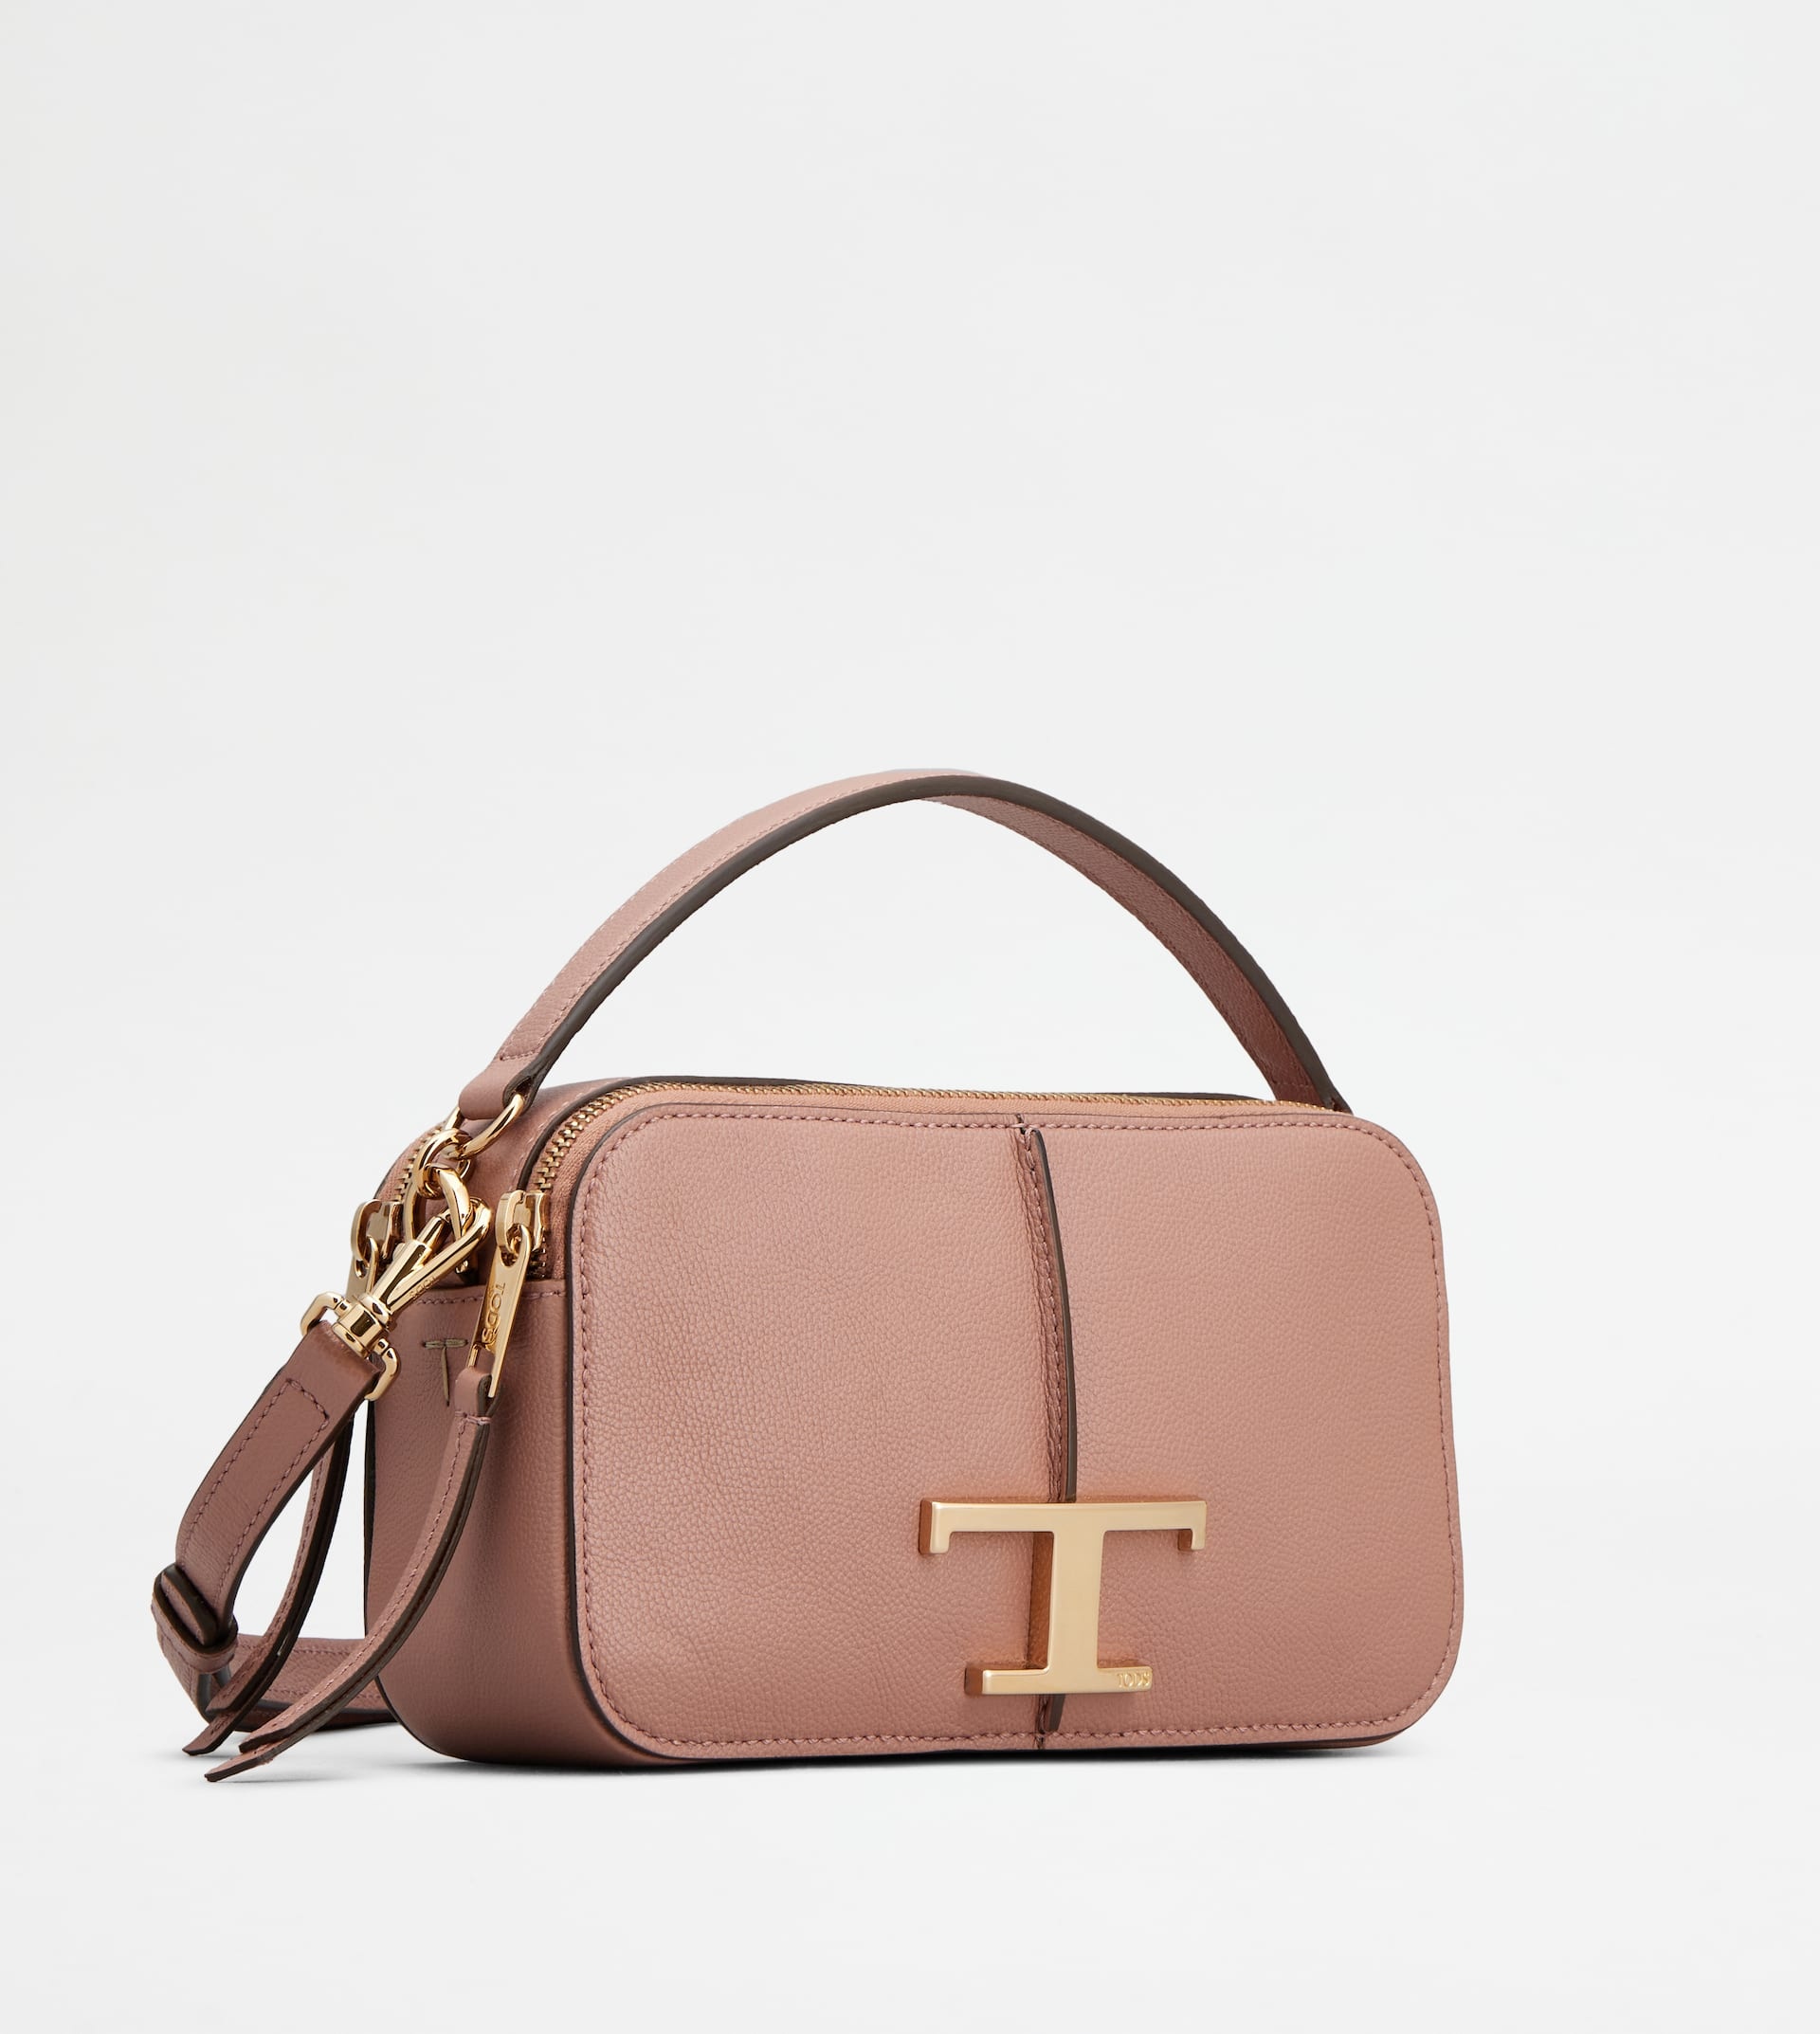 T TIMELESS CAMERA BAG IN LEATHER MINI - PINK - 2